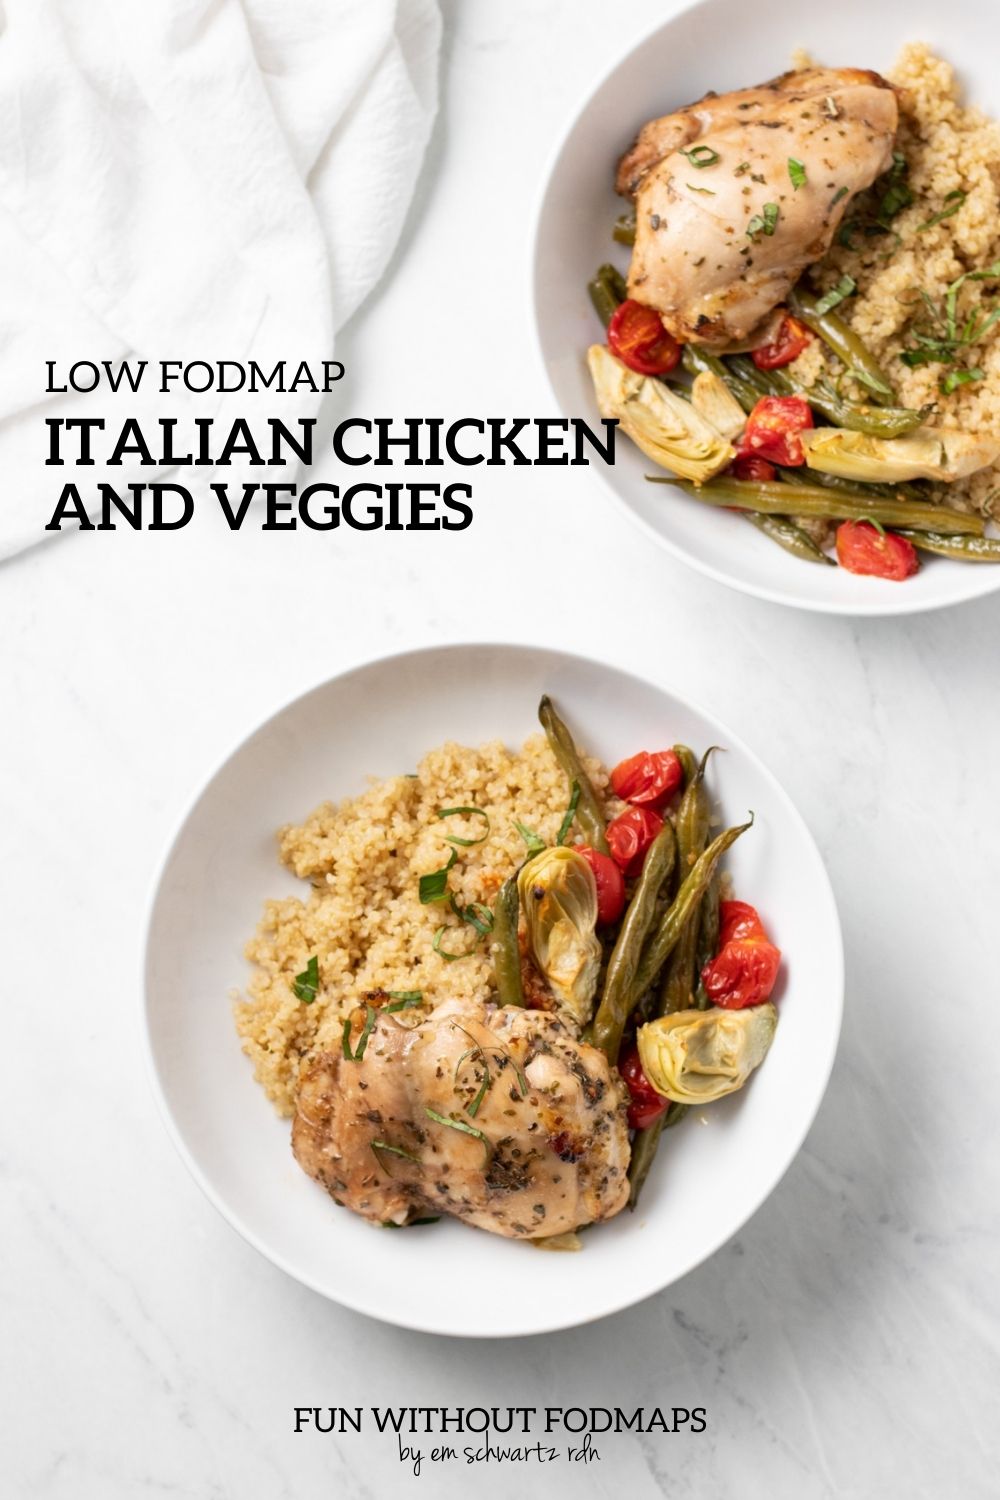 Two bowls with baked chicken, green beans, cherry tomatoes, and canned artichokes over cooked quinoa sit on a white marble counter. In the white space, black text reads "Low FODMAP Italian Chicken and Veggies"